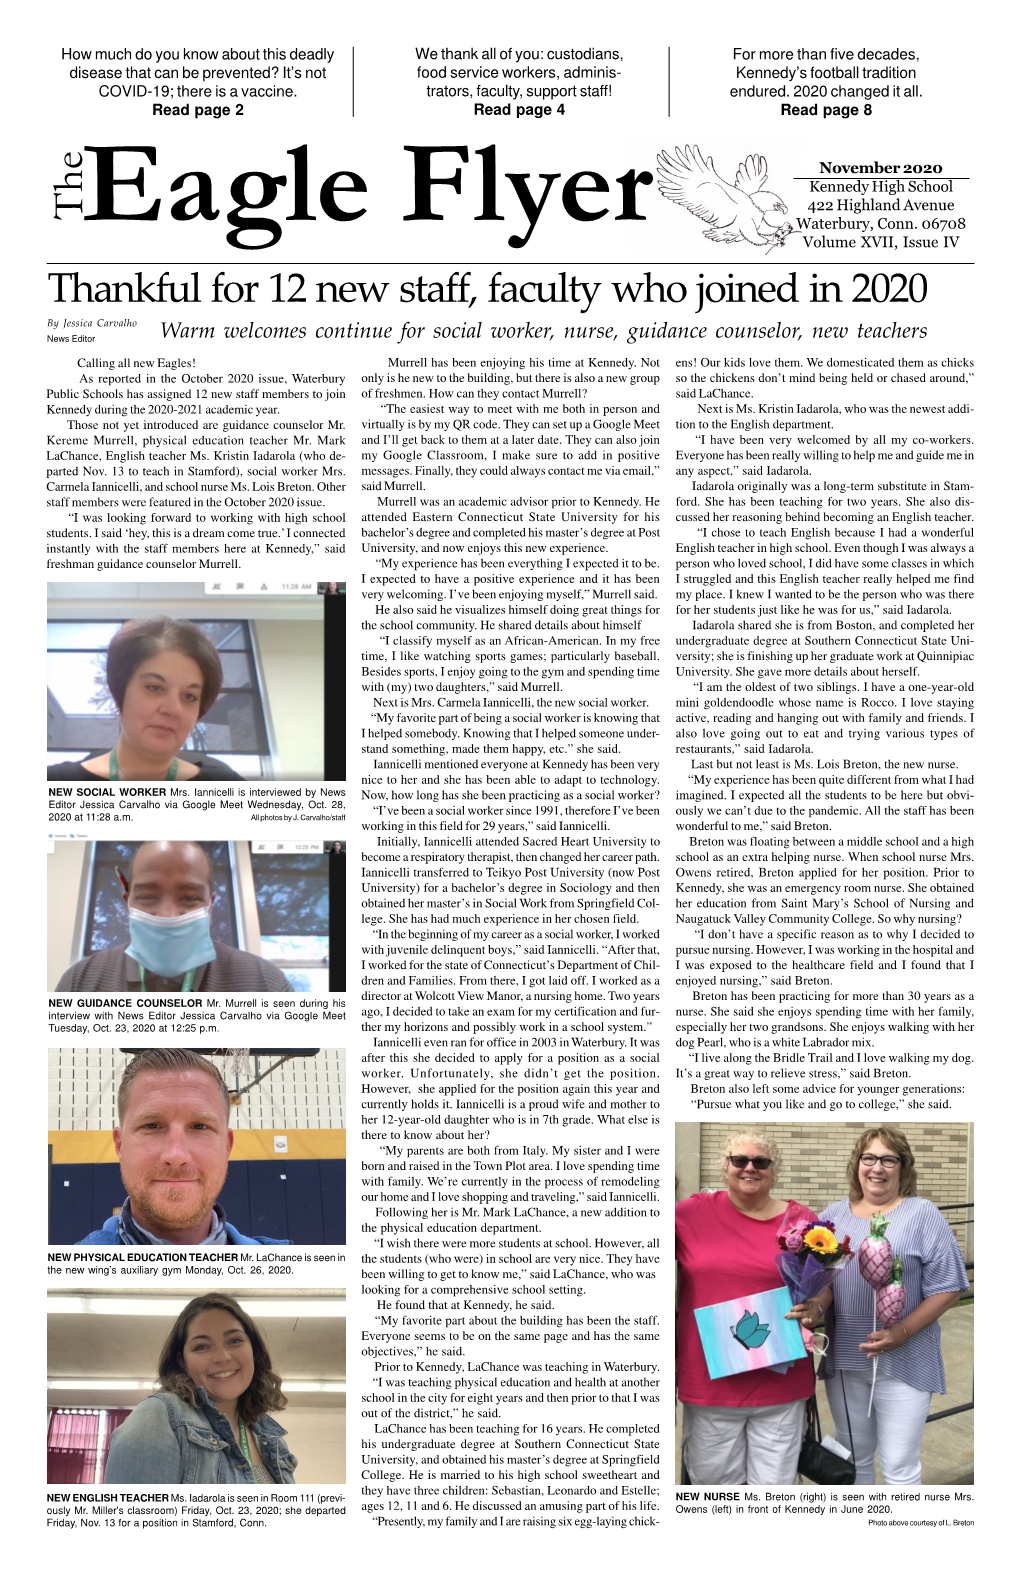 Thankful for 12 New Staff, Faculty Who Joined in 2020